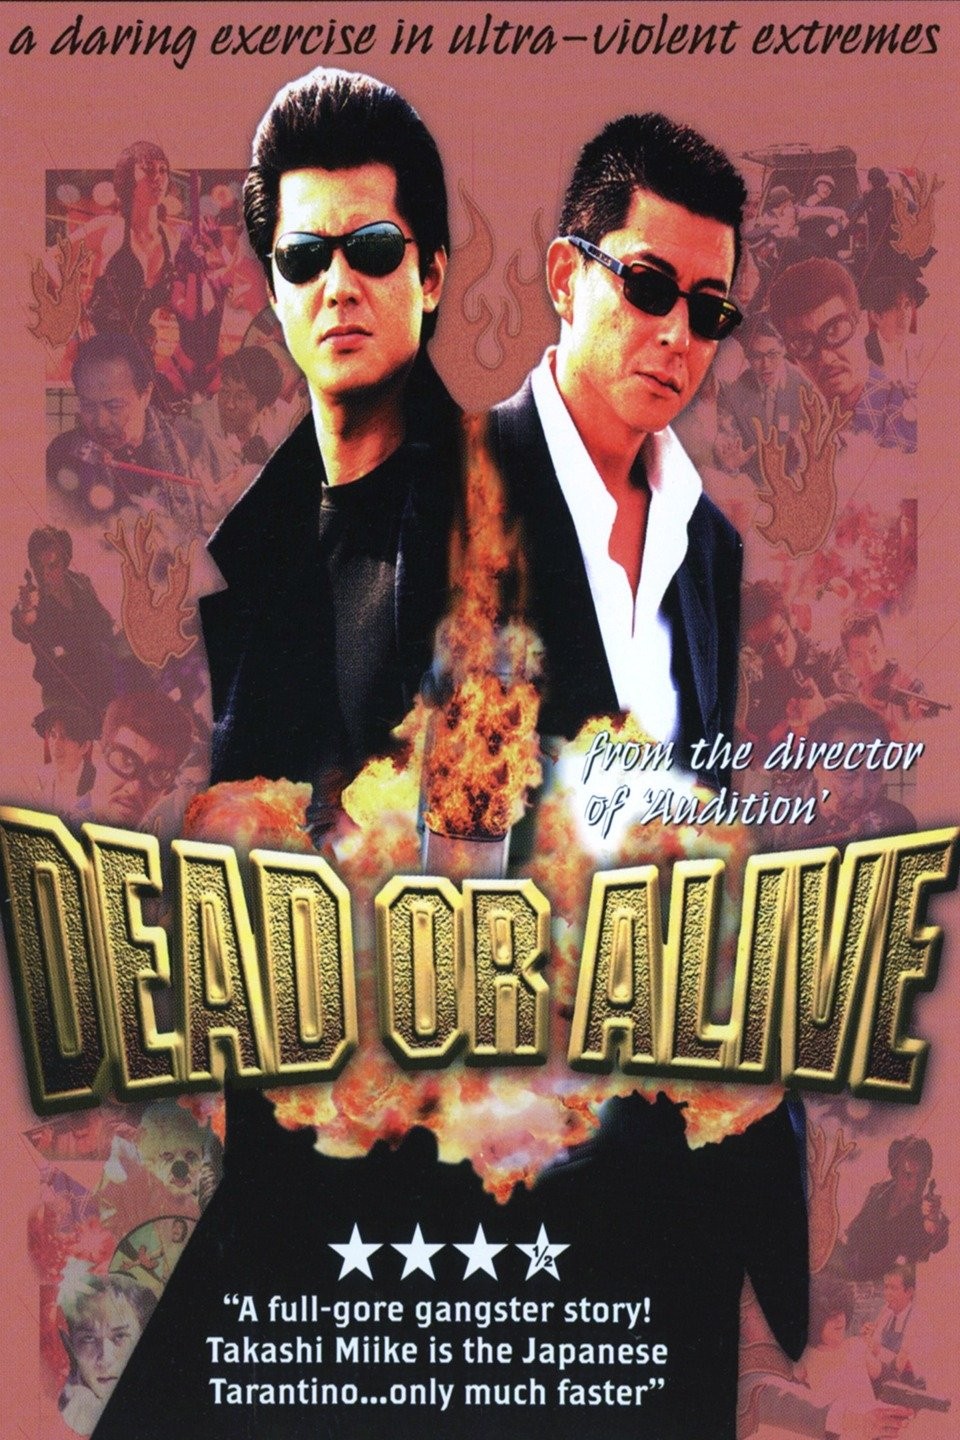 Dead or Alive - Rotten Tomatoes